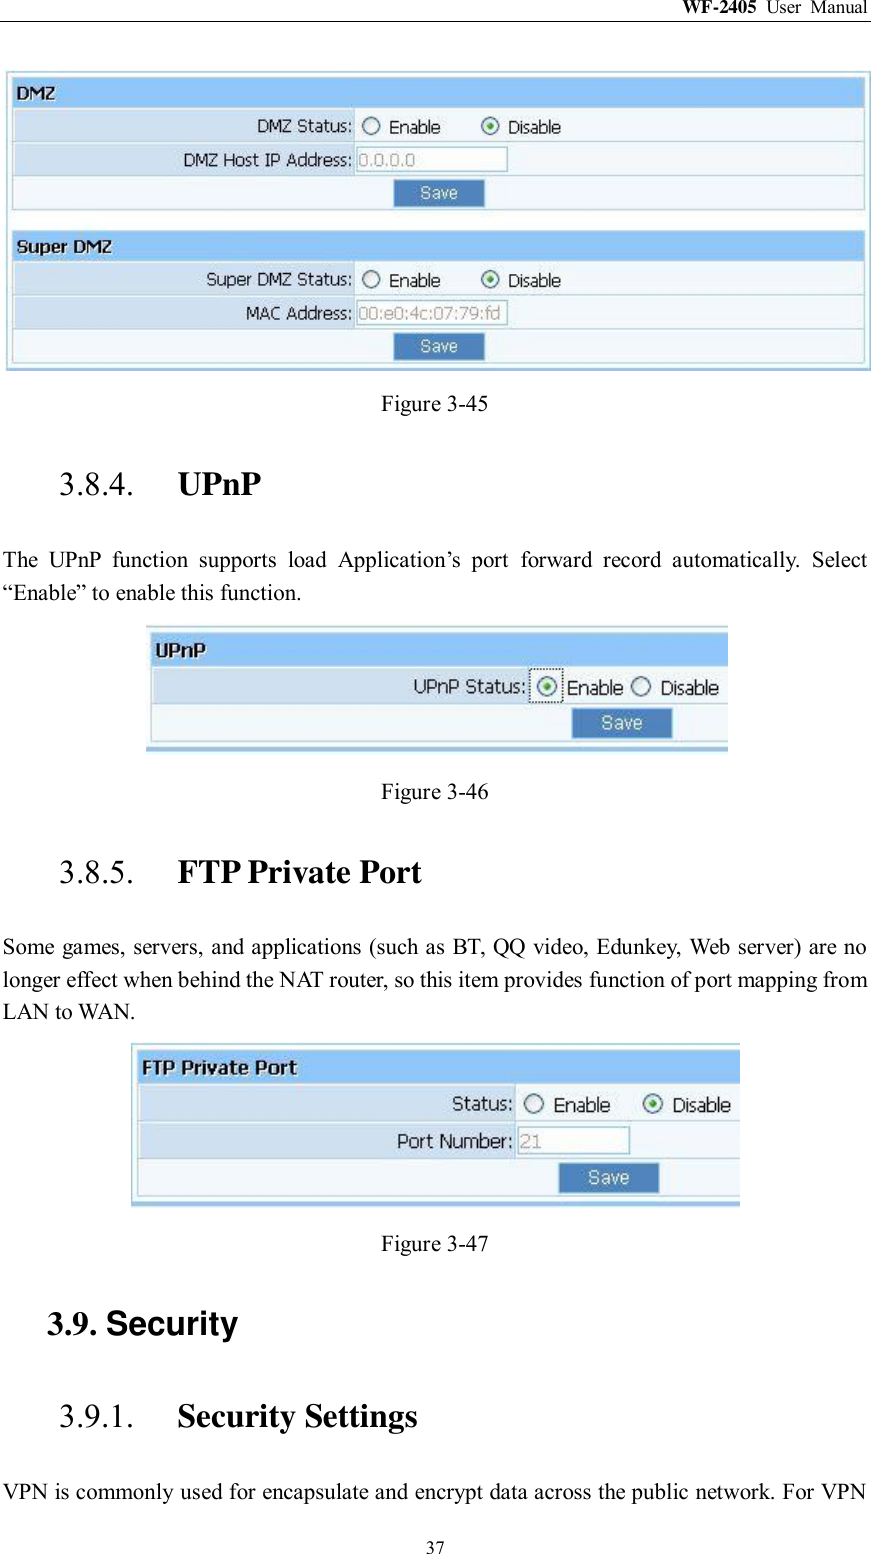 WF-2405  User  Manual  37  Figure 3-45 3.8.4. UPnP The  UPnP  function  supports  load  Application‟s  port  forward  record  automatically.  Select “Enable” to enable this function.  Figure 3-46 3.8.5. FTP Private Port Some games, servers, and applications (such as BT, QQ video, Edunkey, Web server) are no longer effect when behind the NAT router, so this item provides function of port mapping from LAN to WAN.  Figure 3-47 3.9. Security 3.9.1. Security Settings VPN is commonly used for encapsulate and encrypt data across the public network. For VPN 